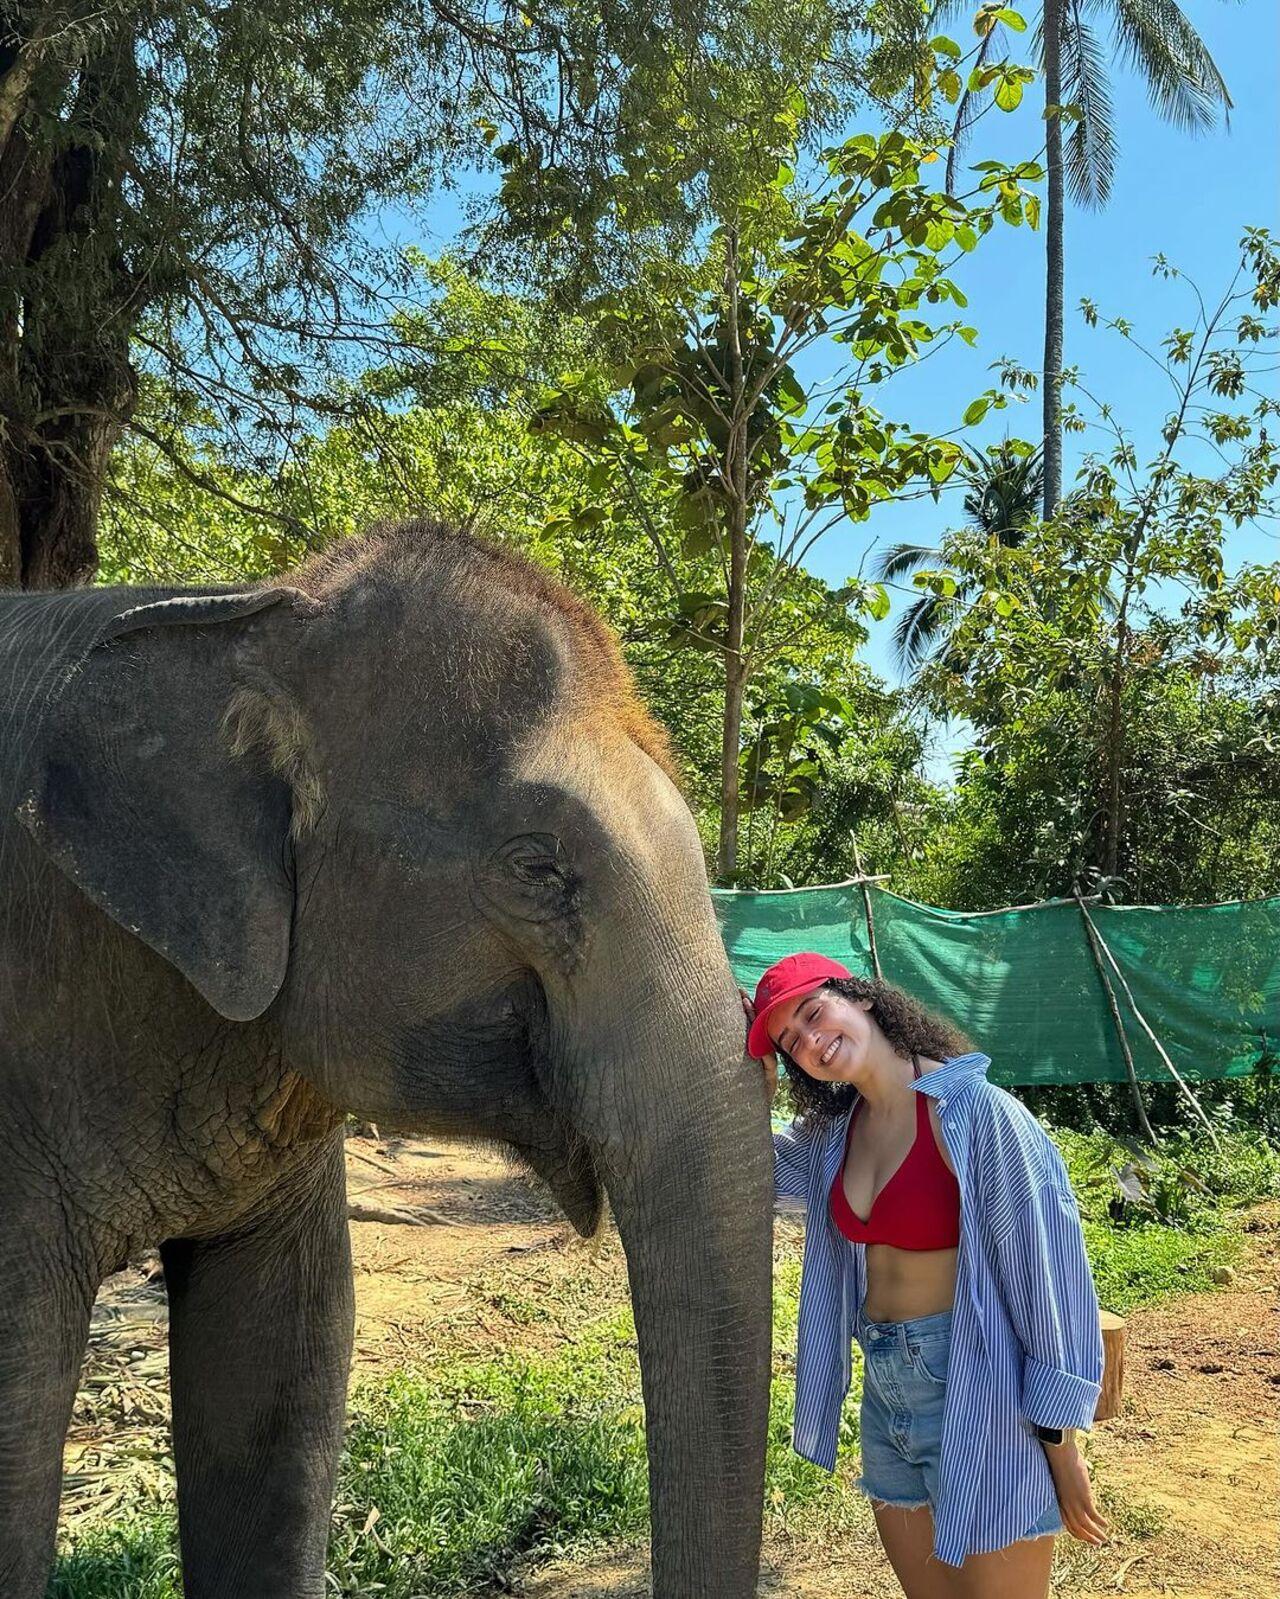 The ‘Dangal’ star also shared an adorable moment interacting with an elephant. 